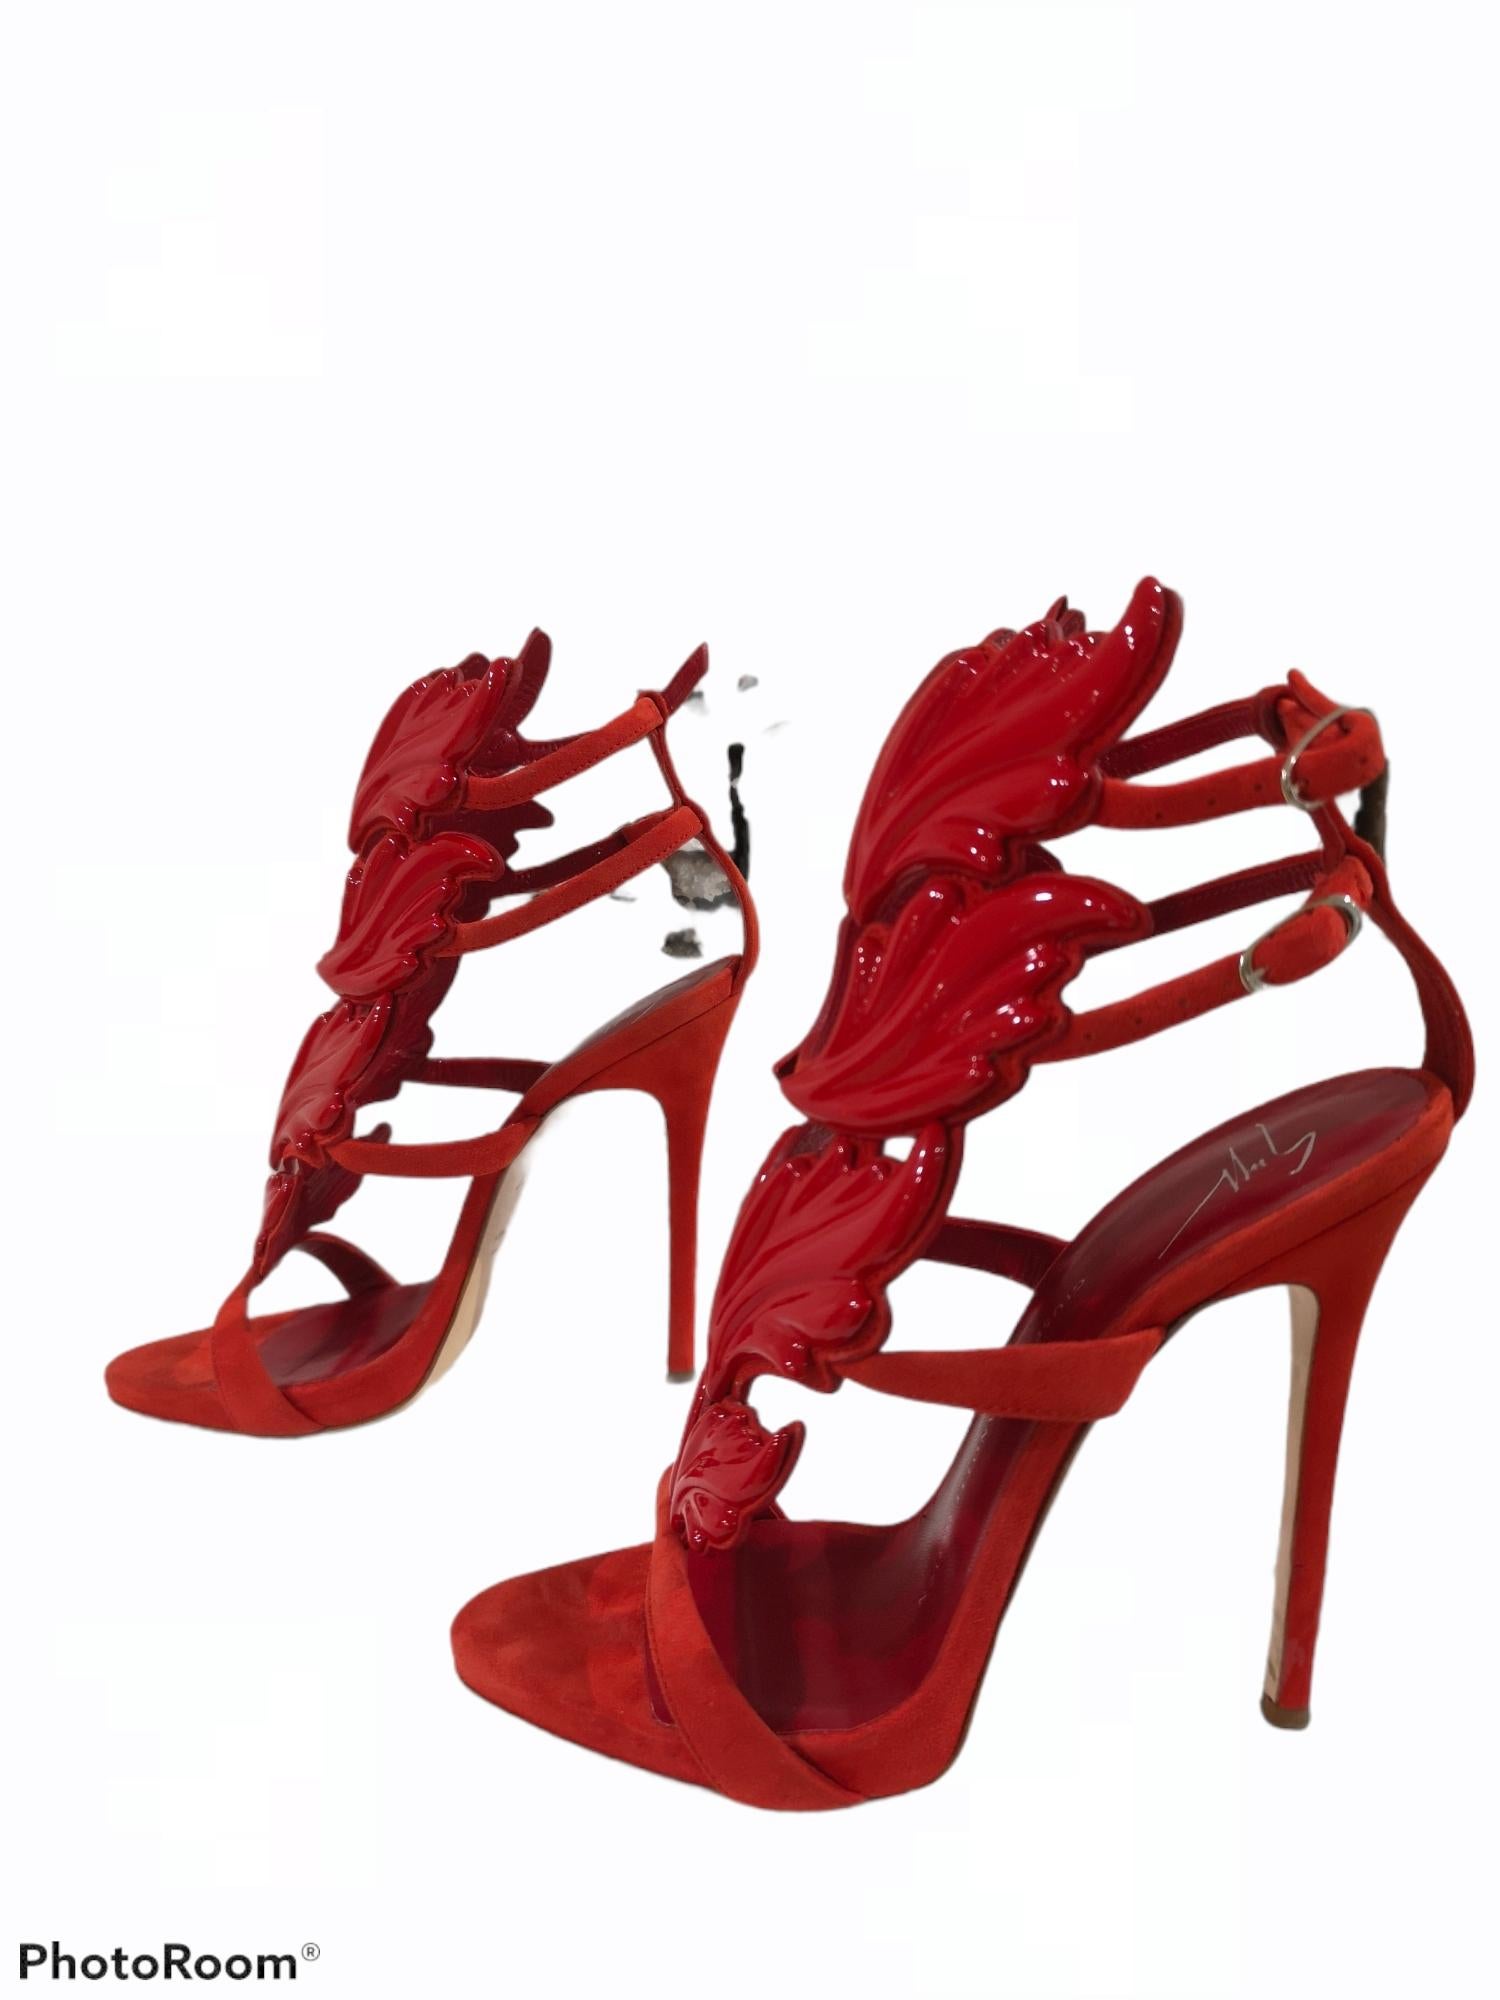 Giuseppe Zanotti CRUEL SANDALS RED

Heel height 12cm
Platform height 1cm
Red calf leather upper
Red 'Cruel' accessory
Covered heel
Adjustable strap with buckle
Leather sole with logo
Made in Italy